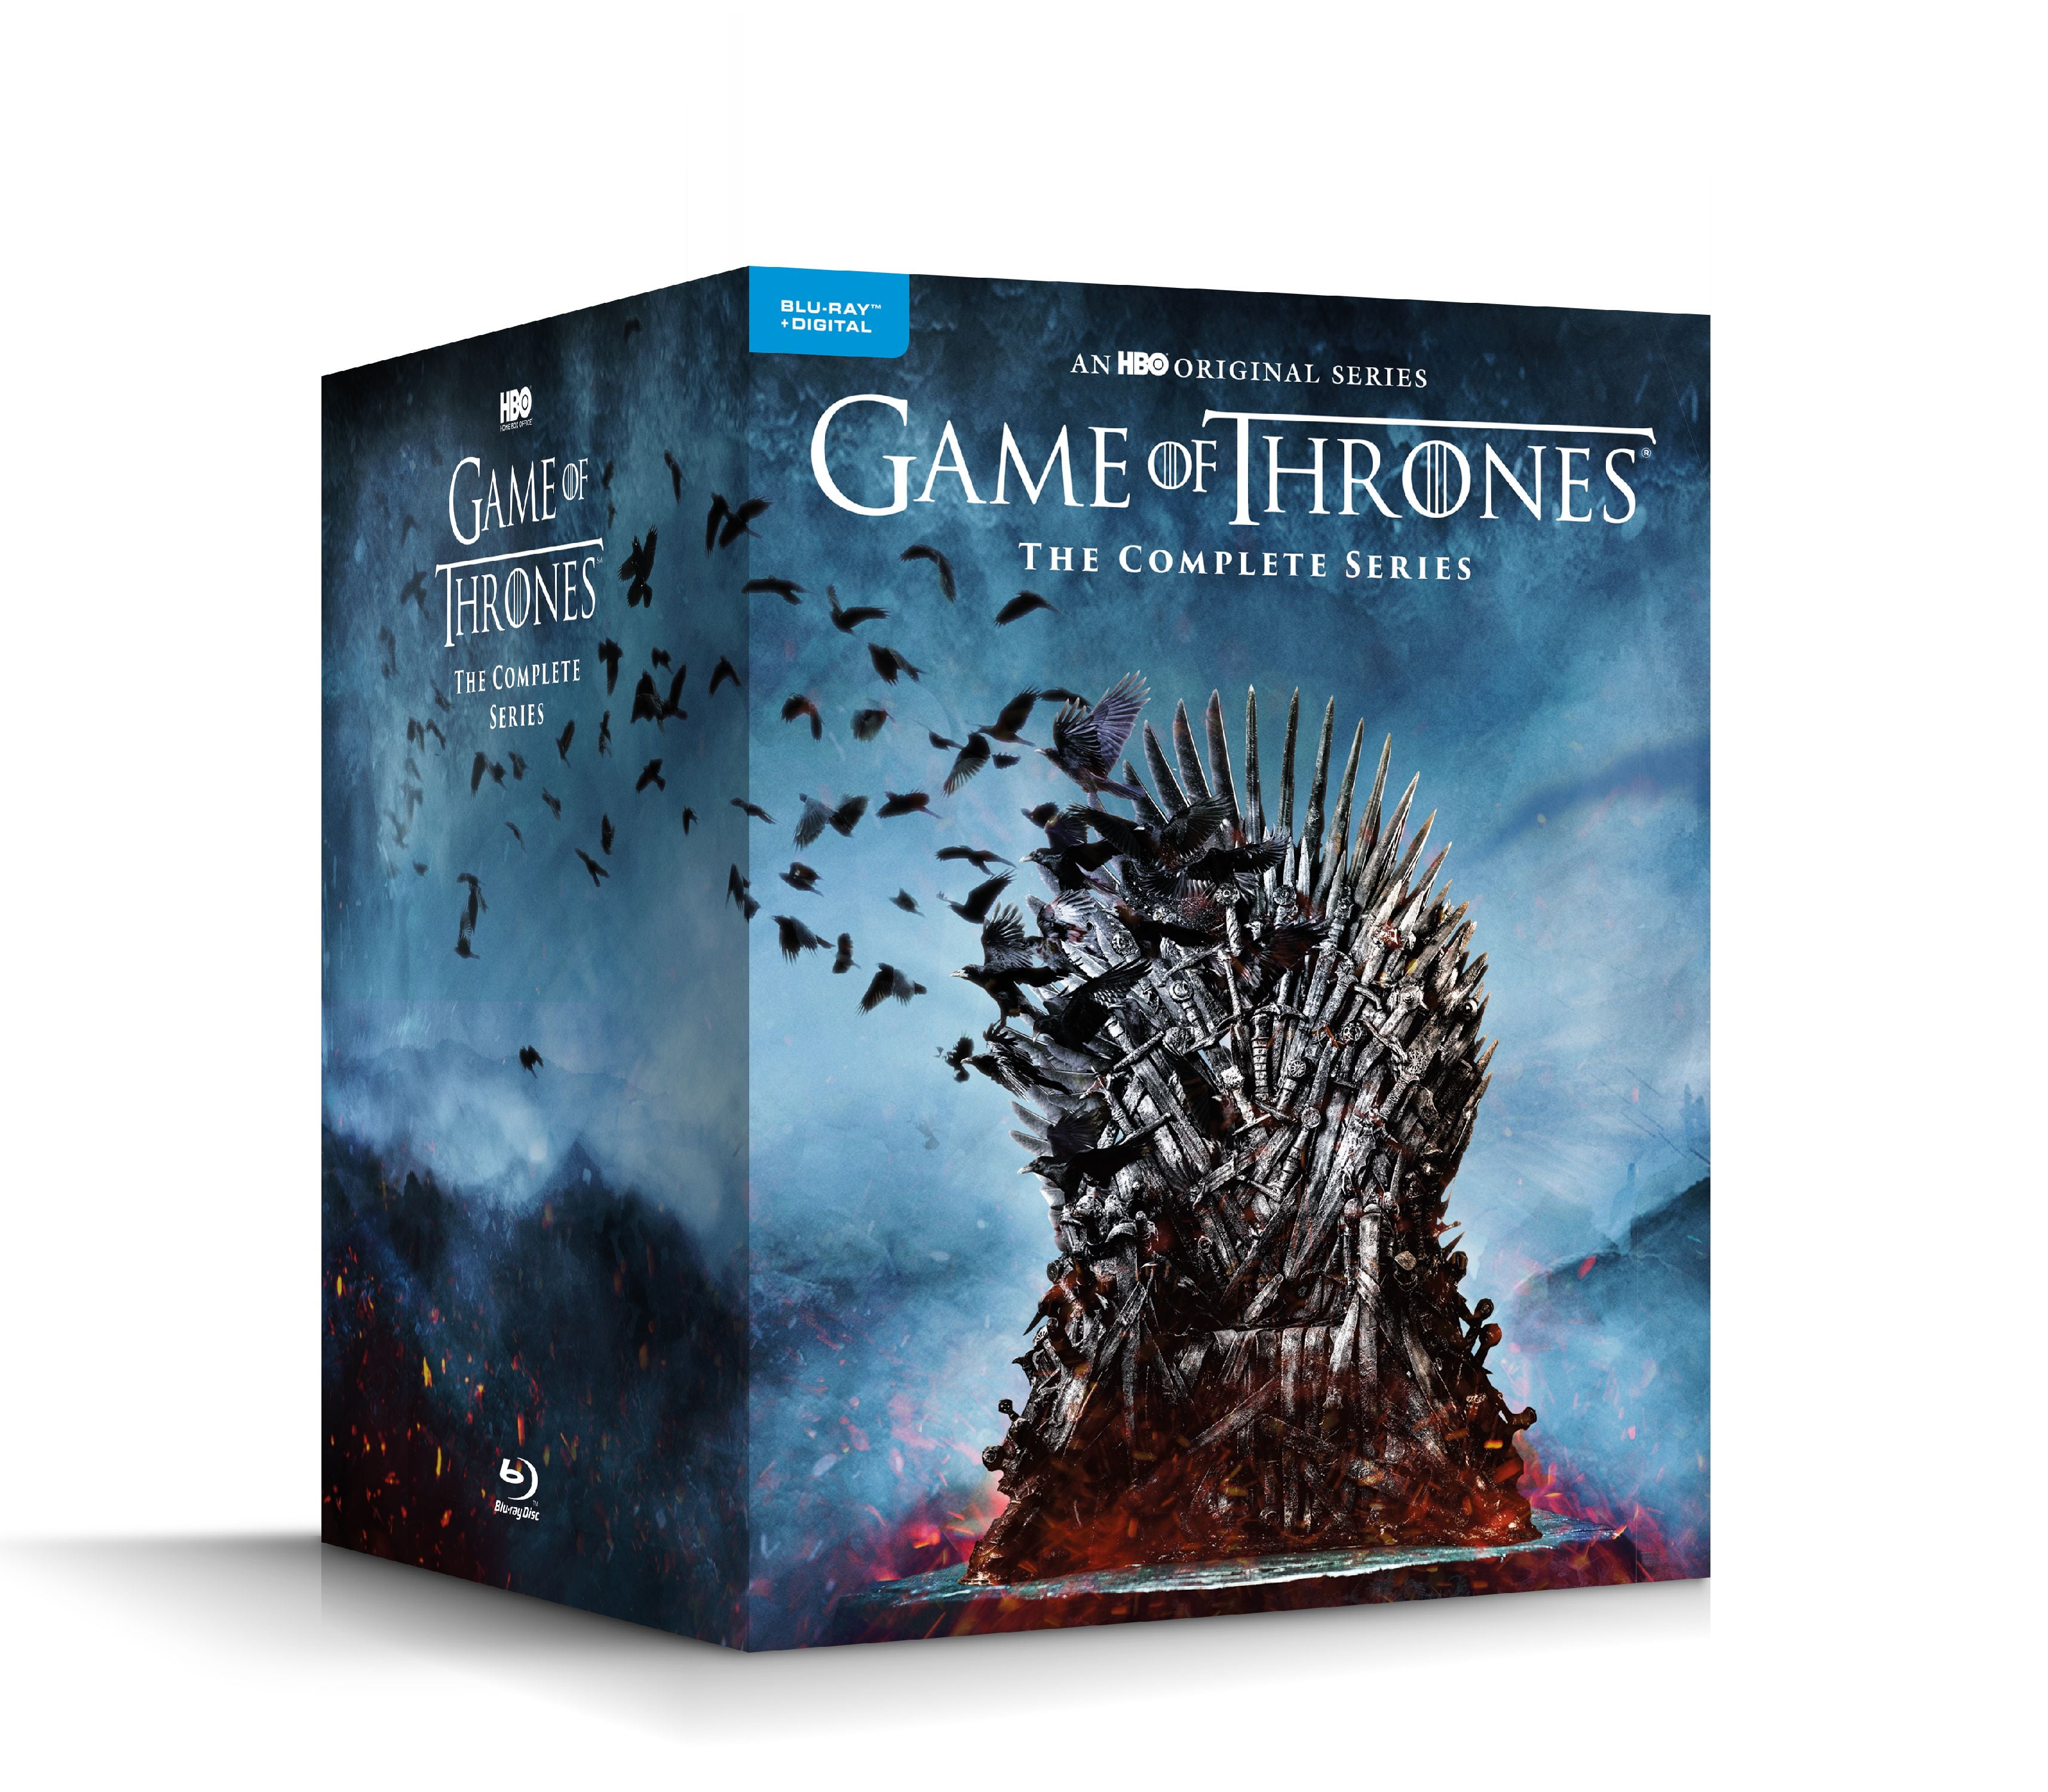 Game of Thrones season 8 products at the HBO Shop